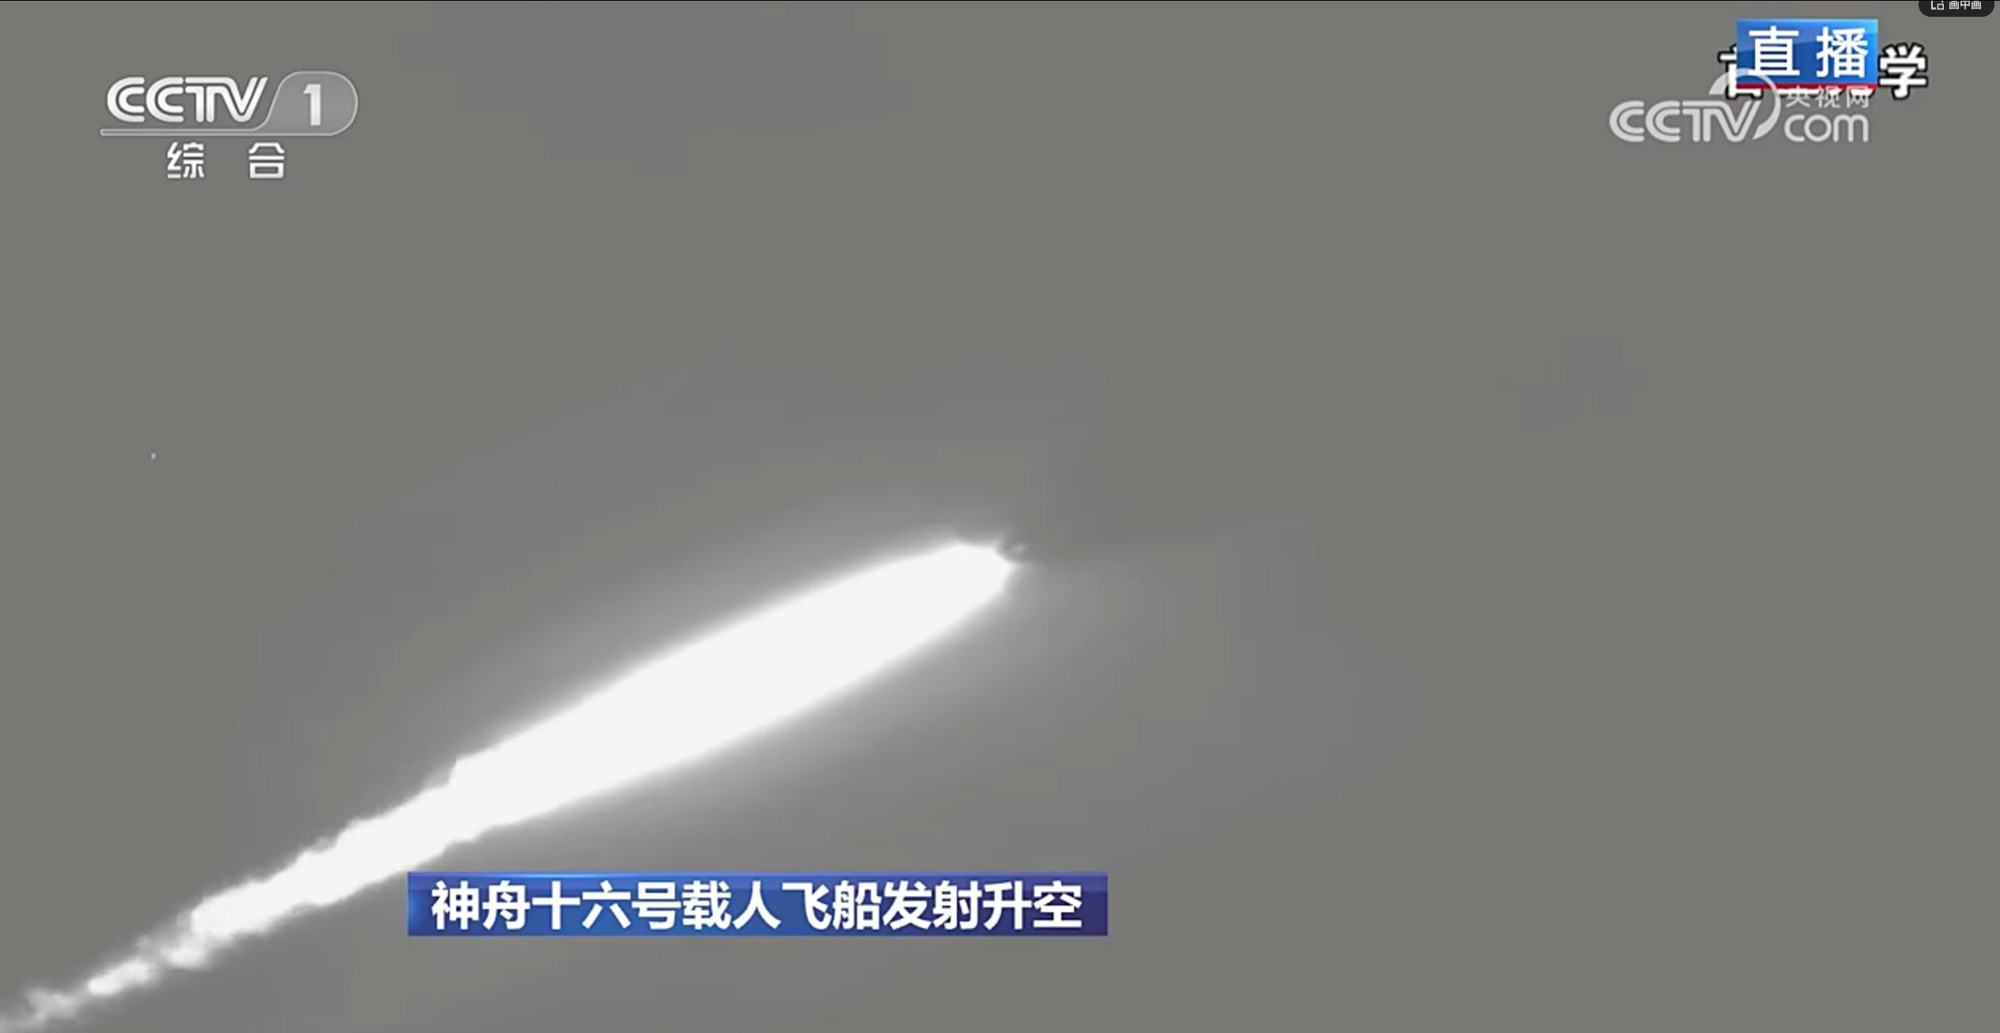 Chinese viewers tuned into state broadcaster CCTV to see the Shenzhou 16 hurtling into space on Tuesday morning. Photo: CCTV